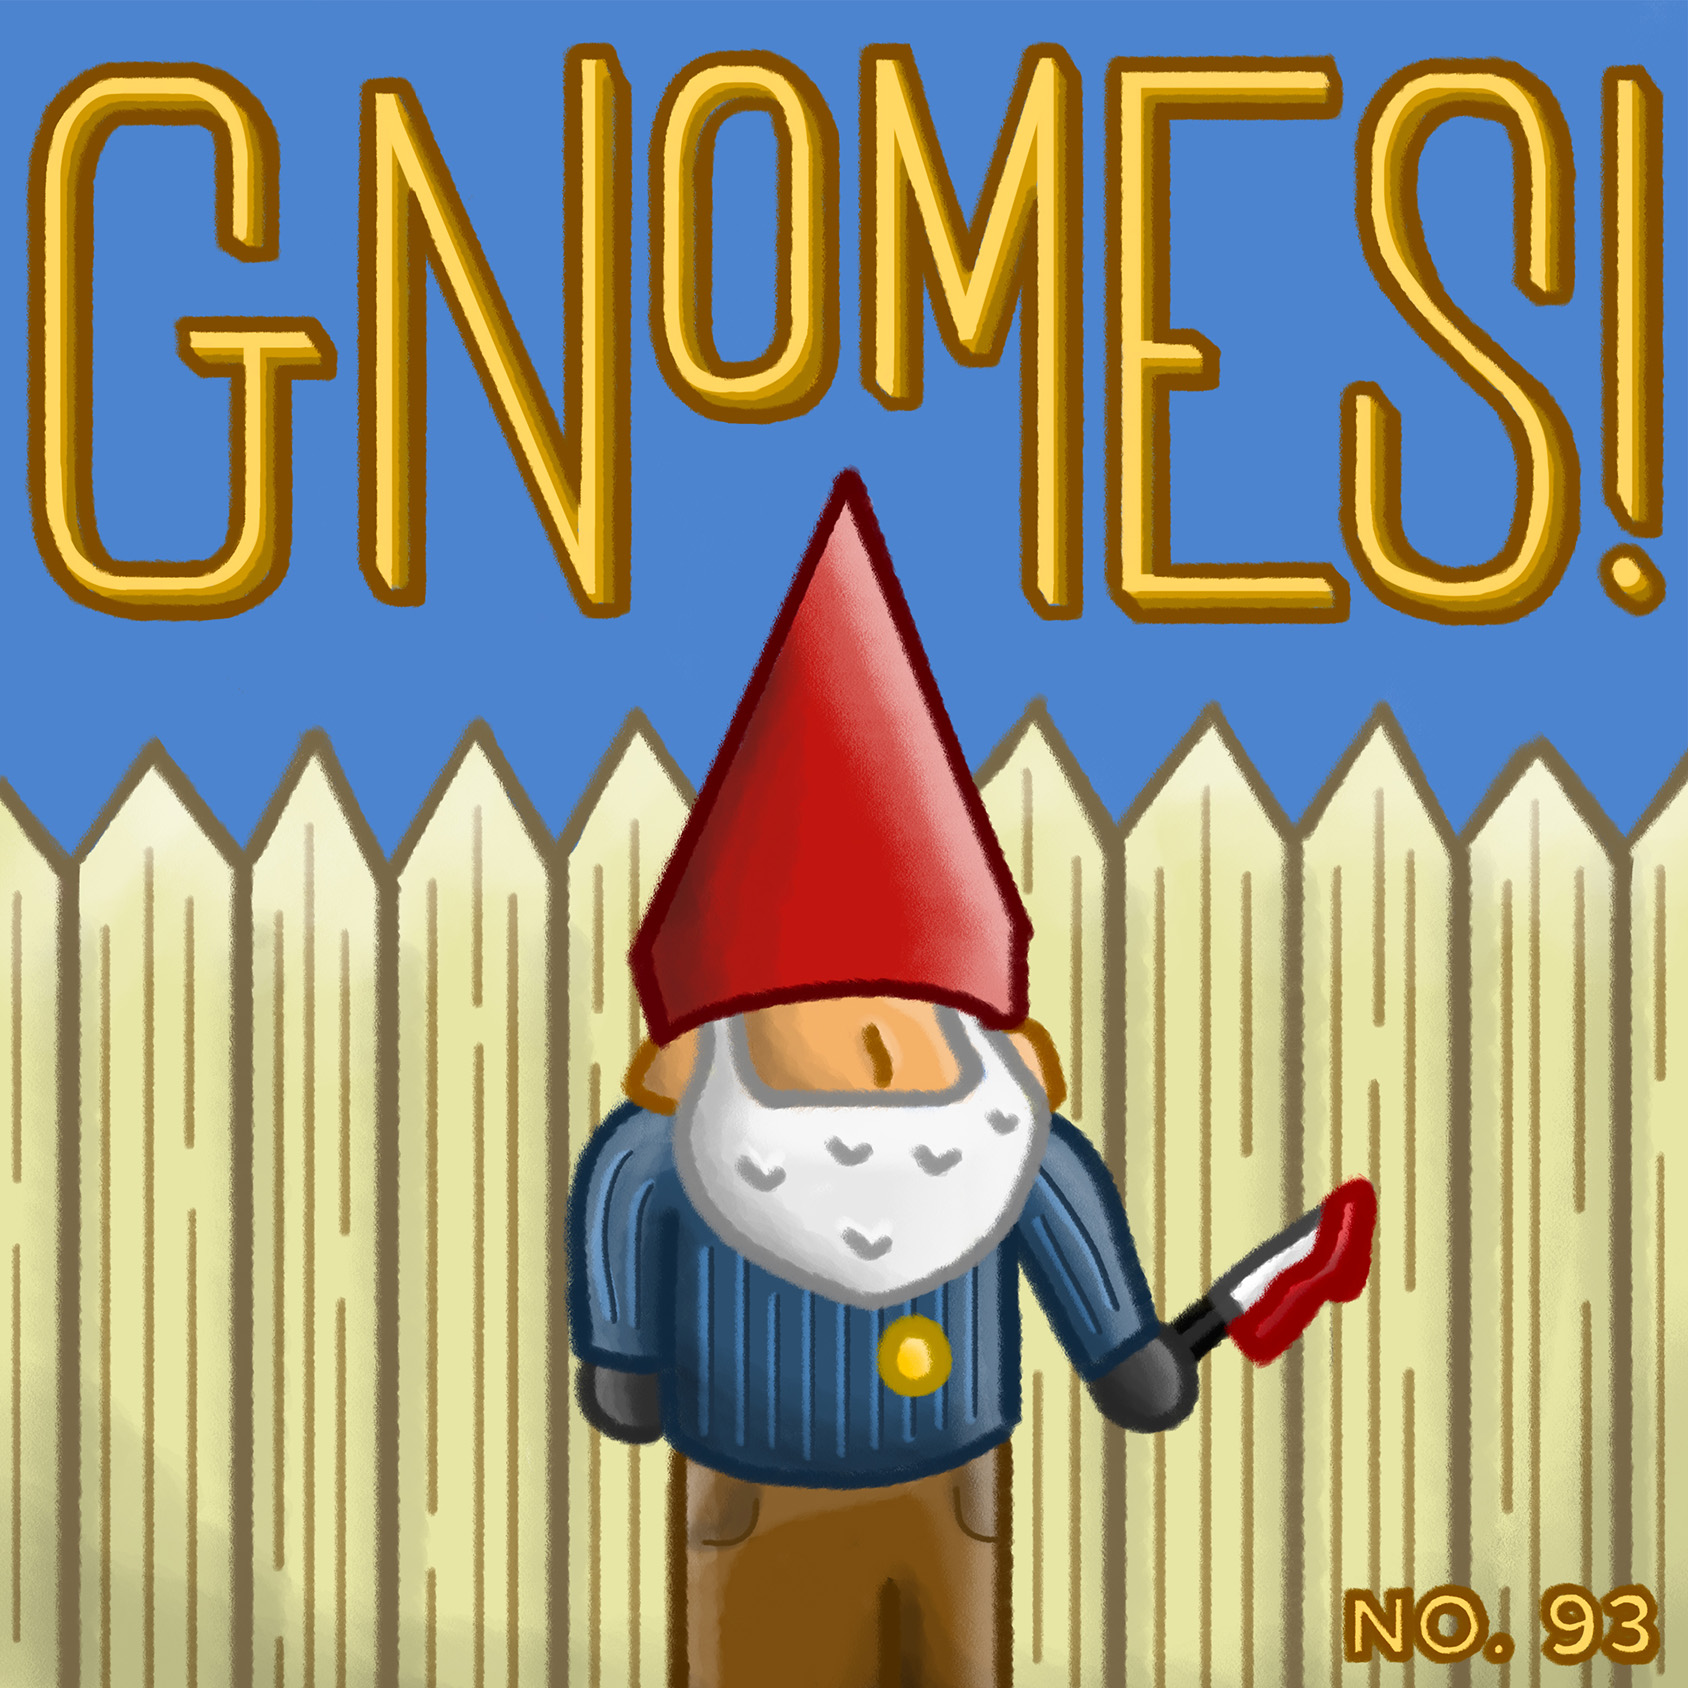 Illustration of a garden gnome holding a bloody knife. The title of the podcast episode 'Gnomes!' is written in the background and the episode number '93' is in the bottom right.